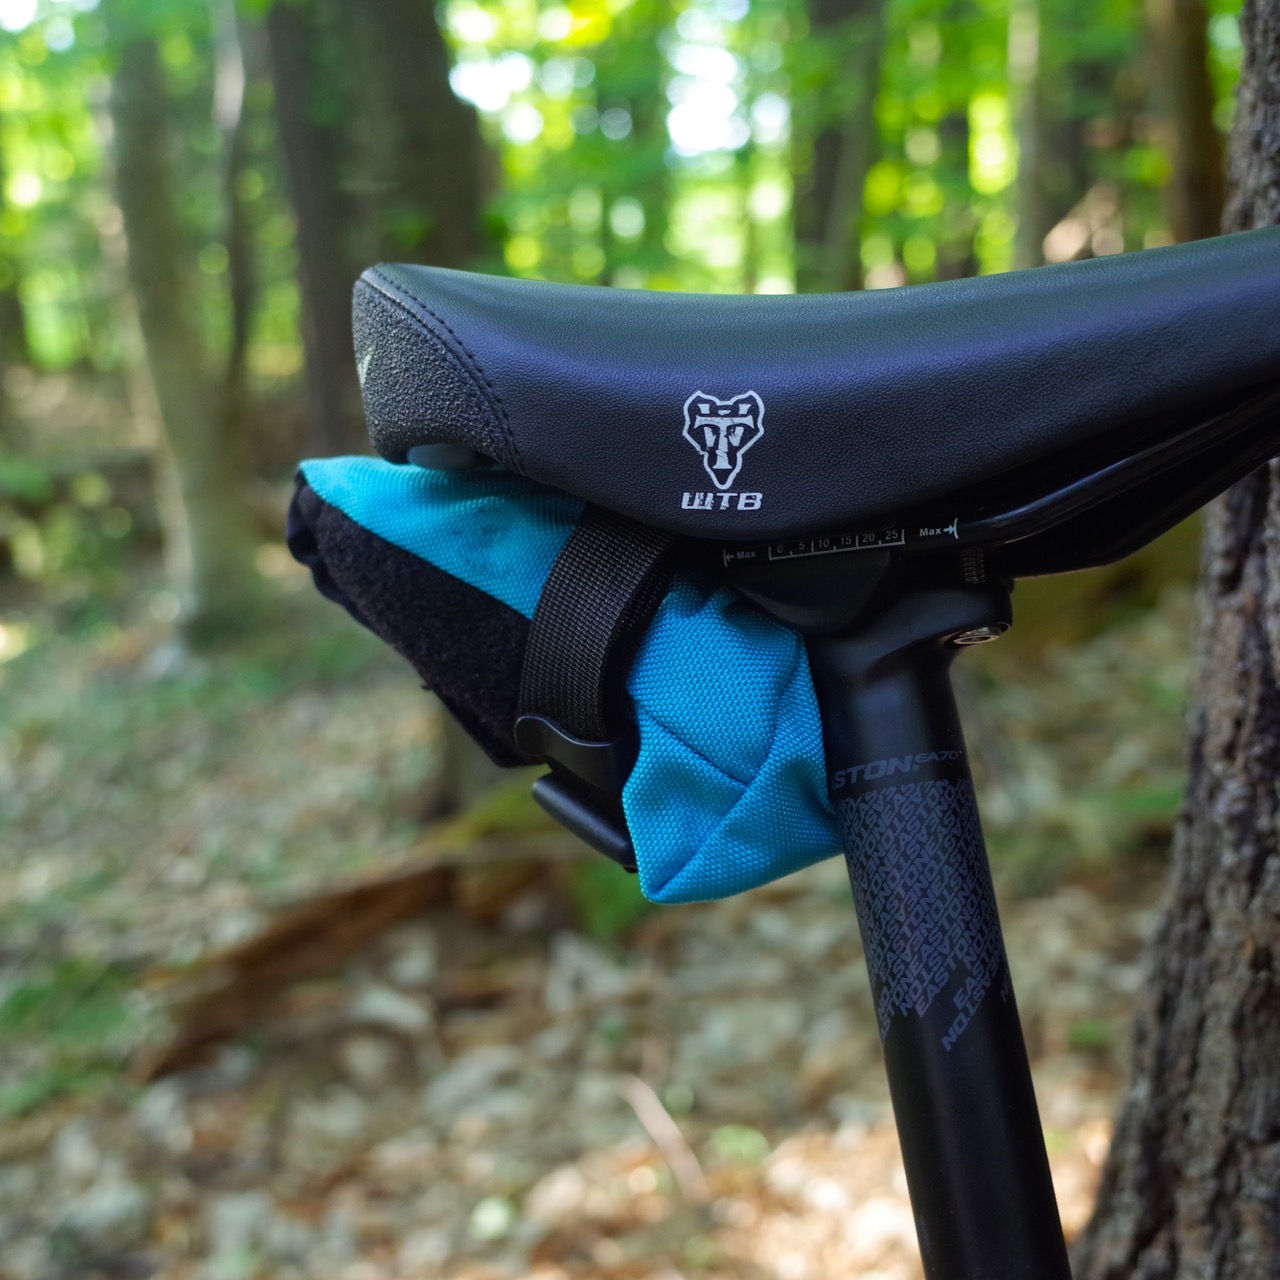 Gear Review: Inside Line Equipment Seat Bag – Max, The Cyclist